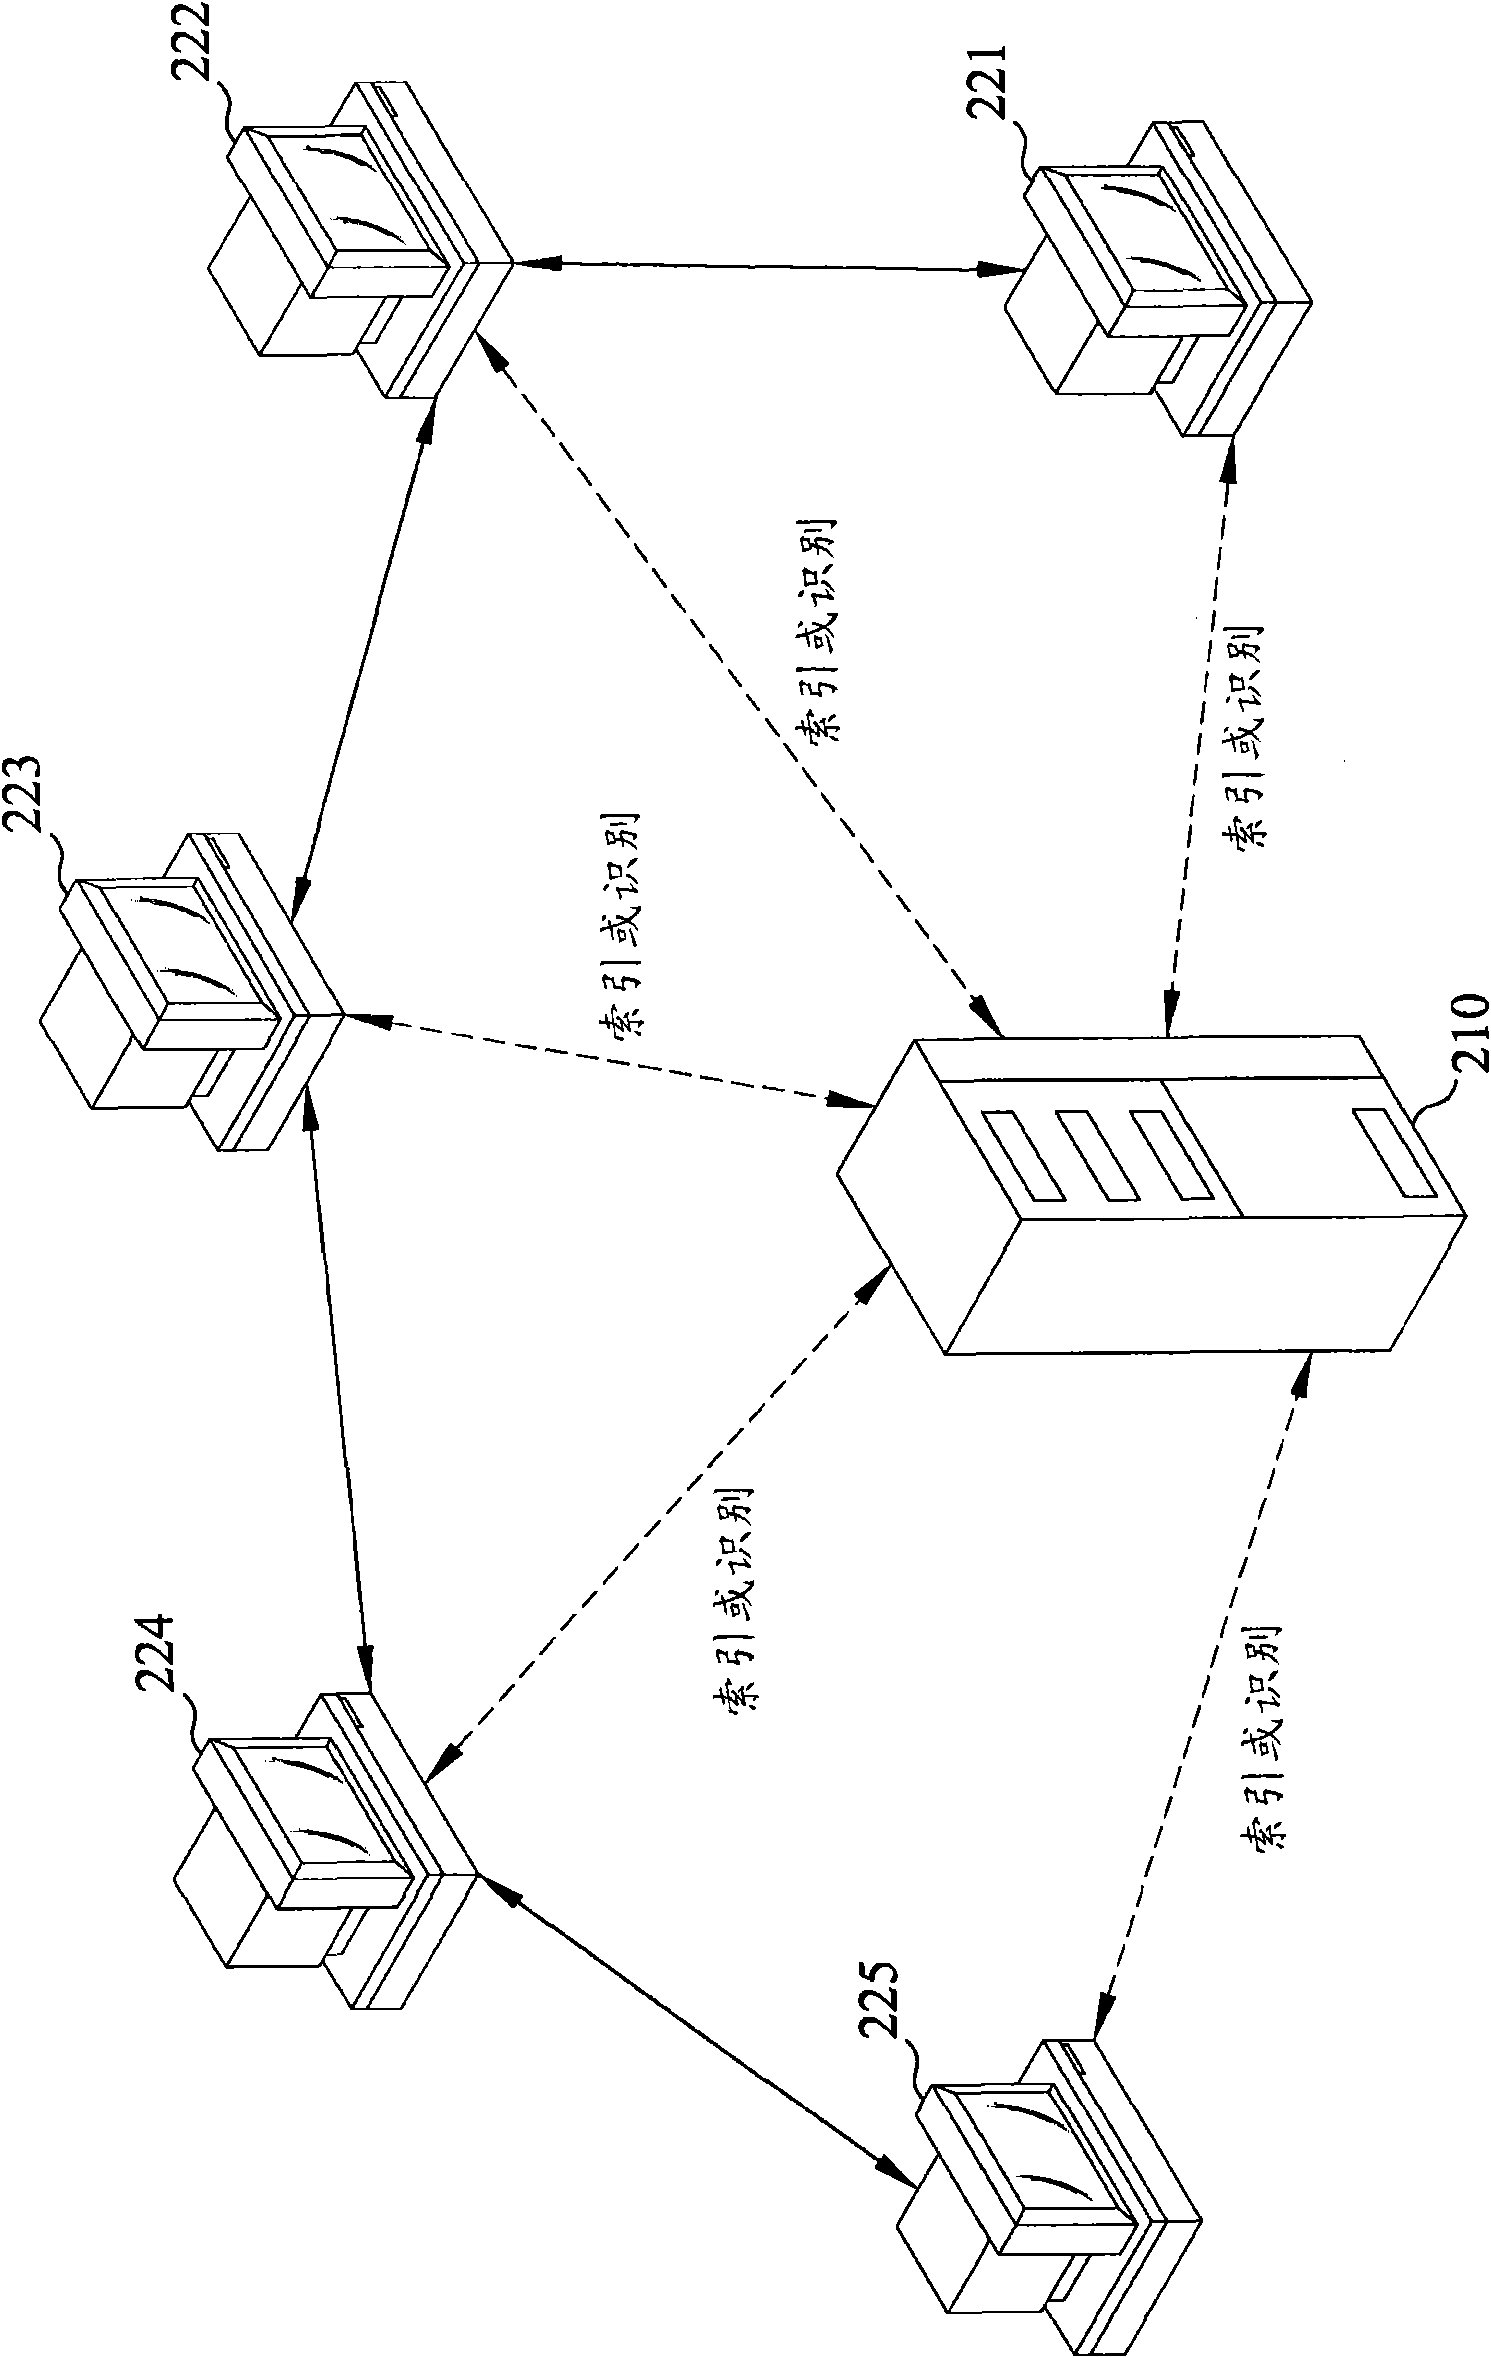 Hybrid equivalent and master-slave type data transmission architecture and method